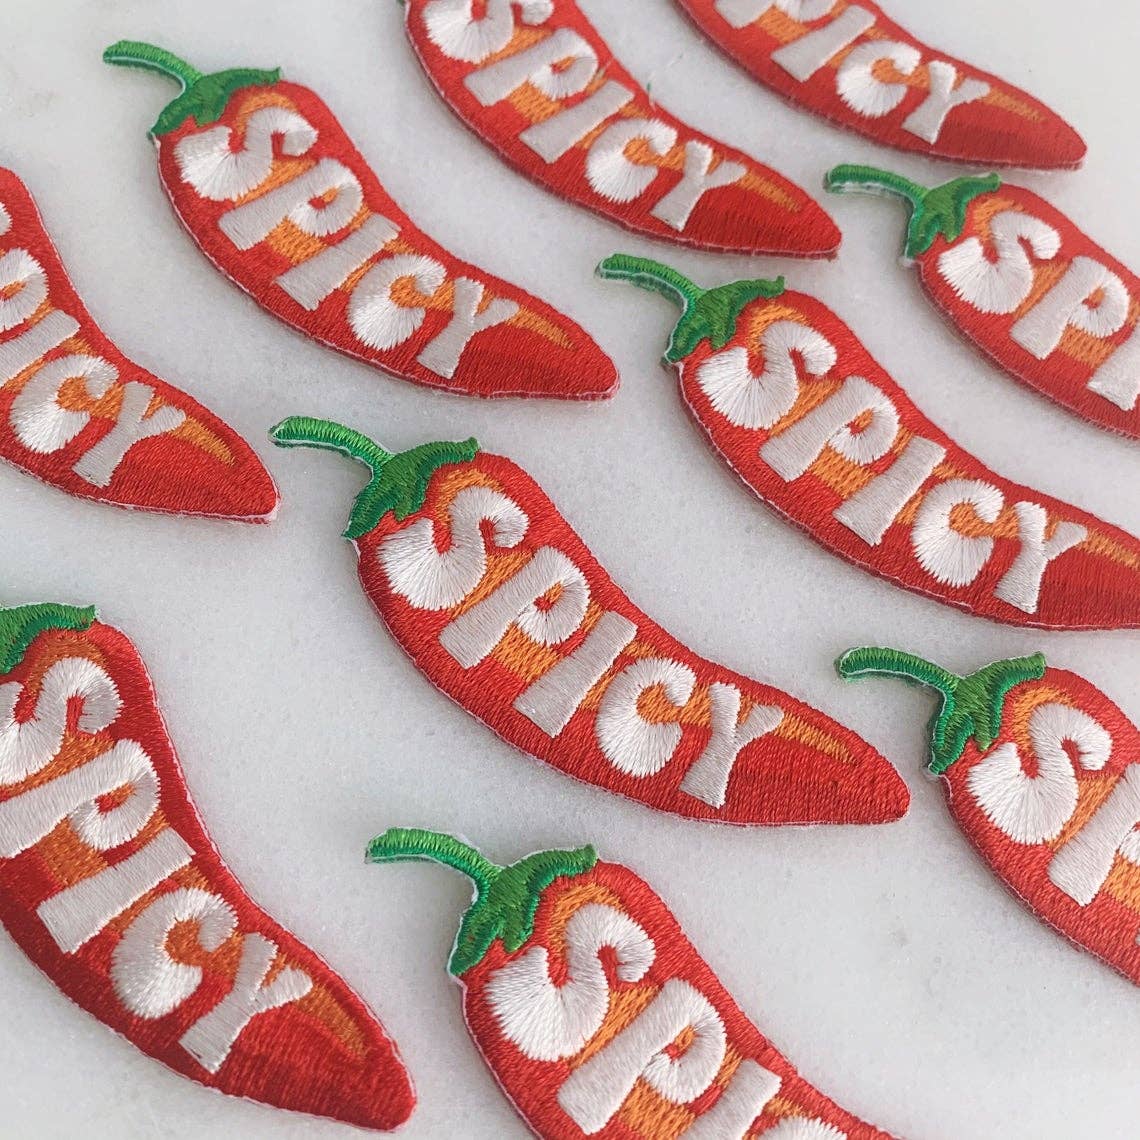 Spicy Pepper Patch | Groovy 70s Embroidered Chili Pepper Applique